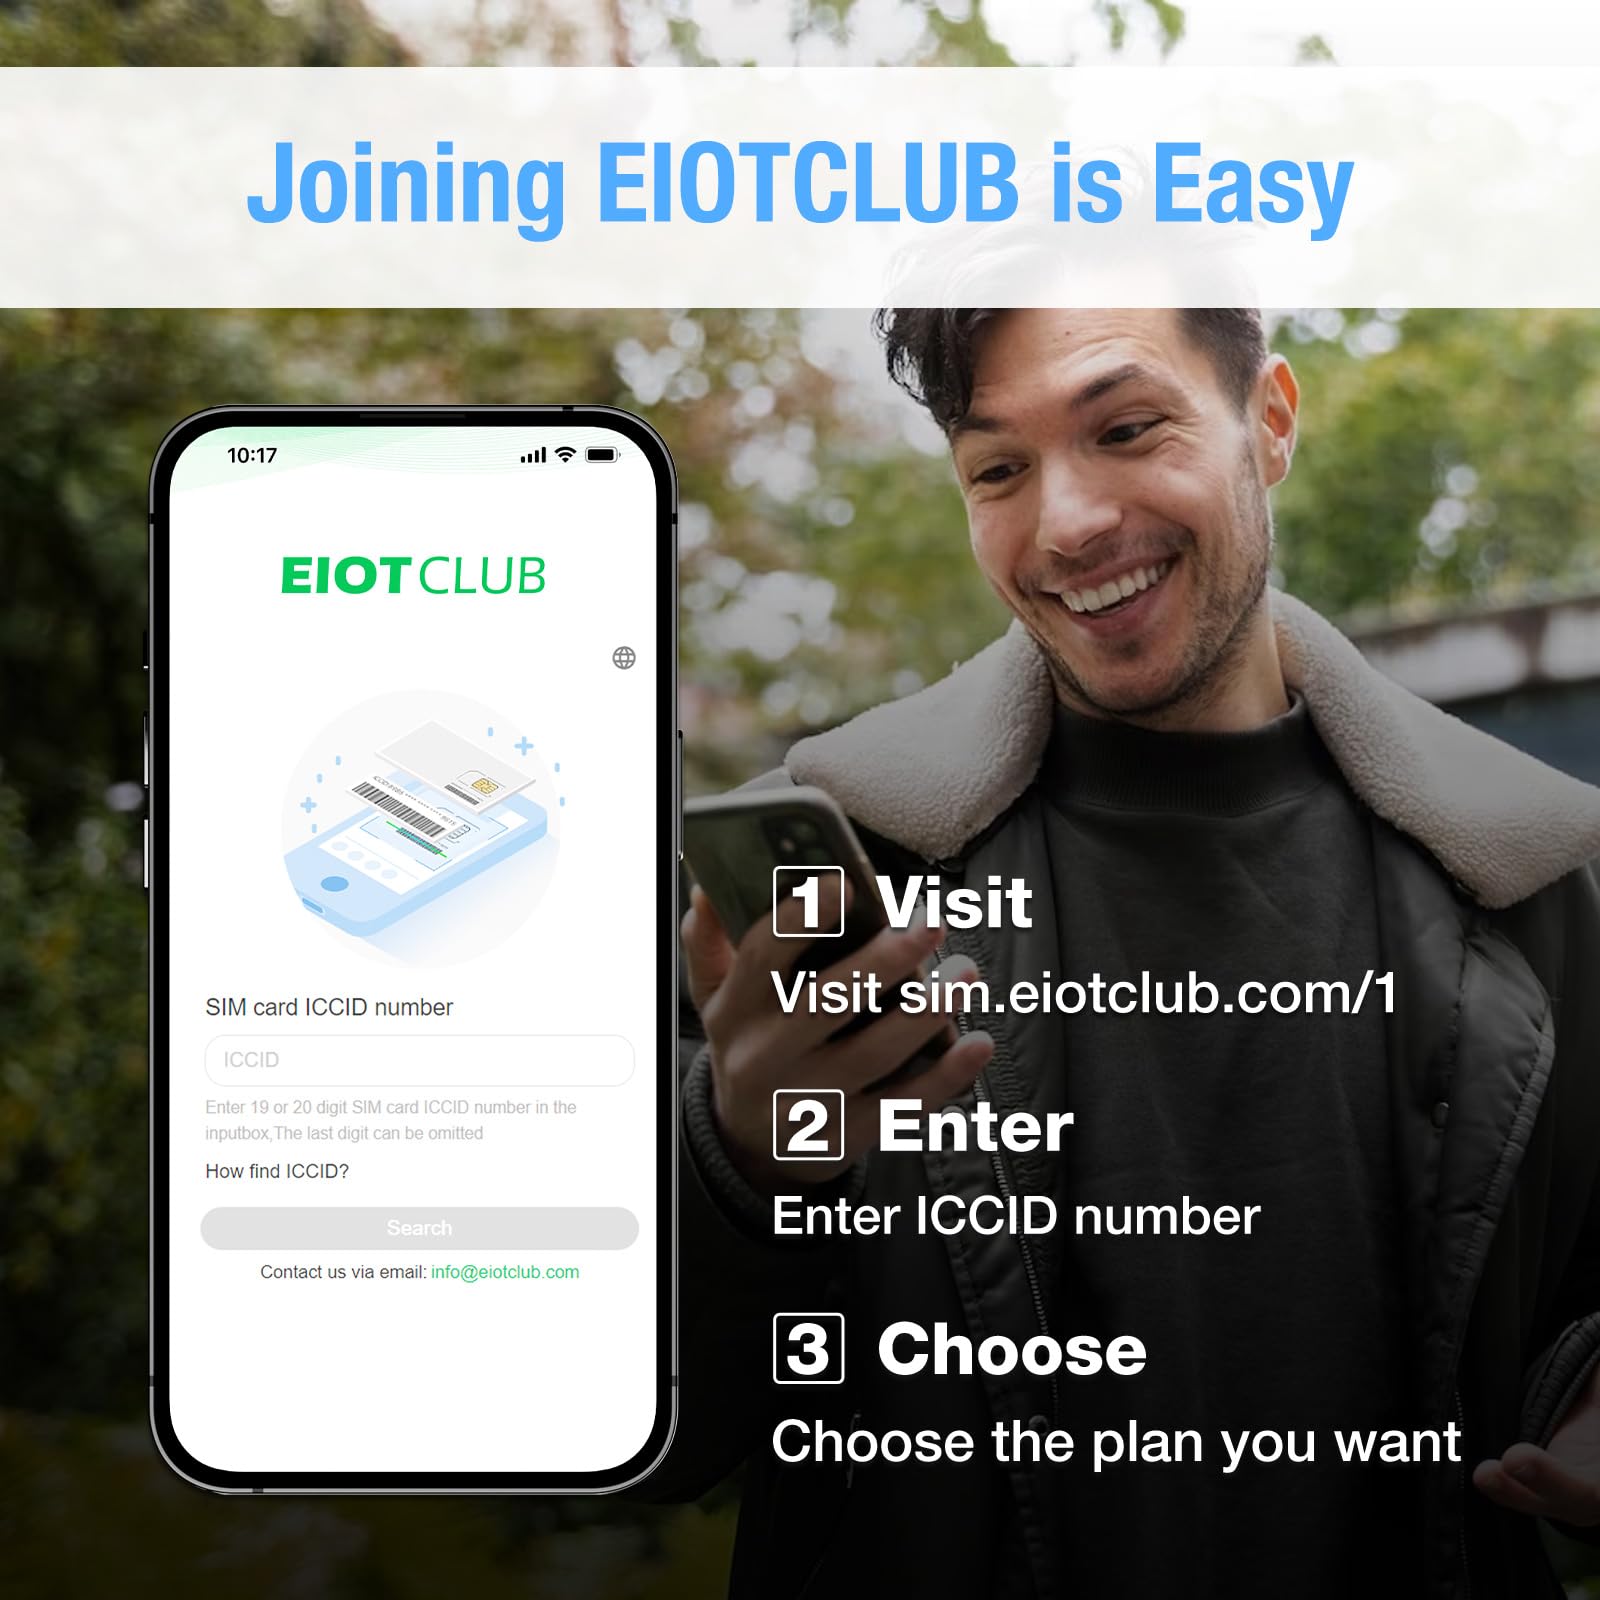 EIOTCLUB Data SIM Card 4G LTE Support AT&T and T-Mobile for Cellular Security Camera Hunting Camera 4G Router Unlocked IoT Device (No Phone Number, Data Only)